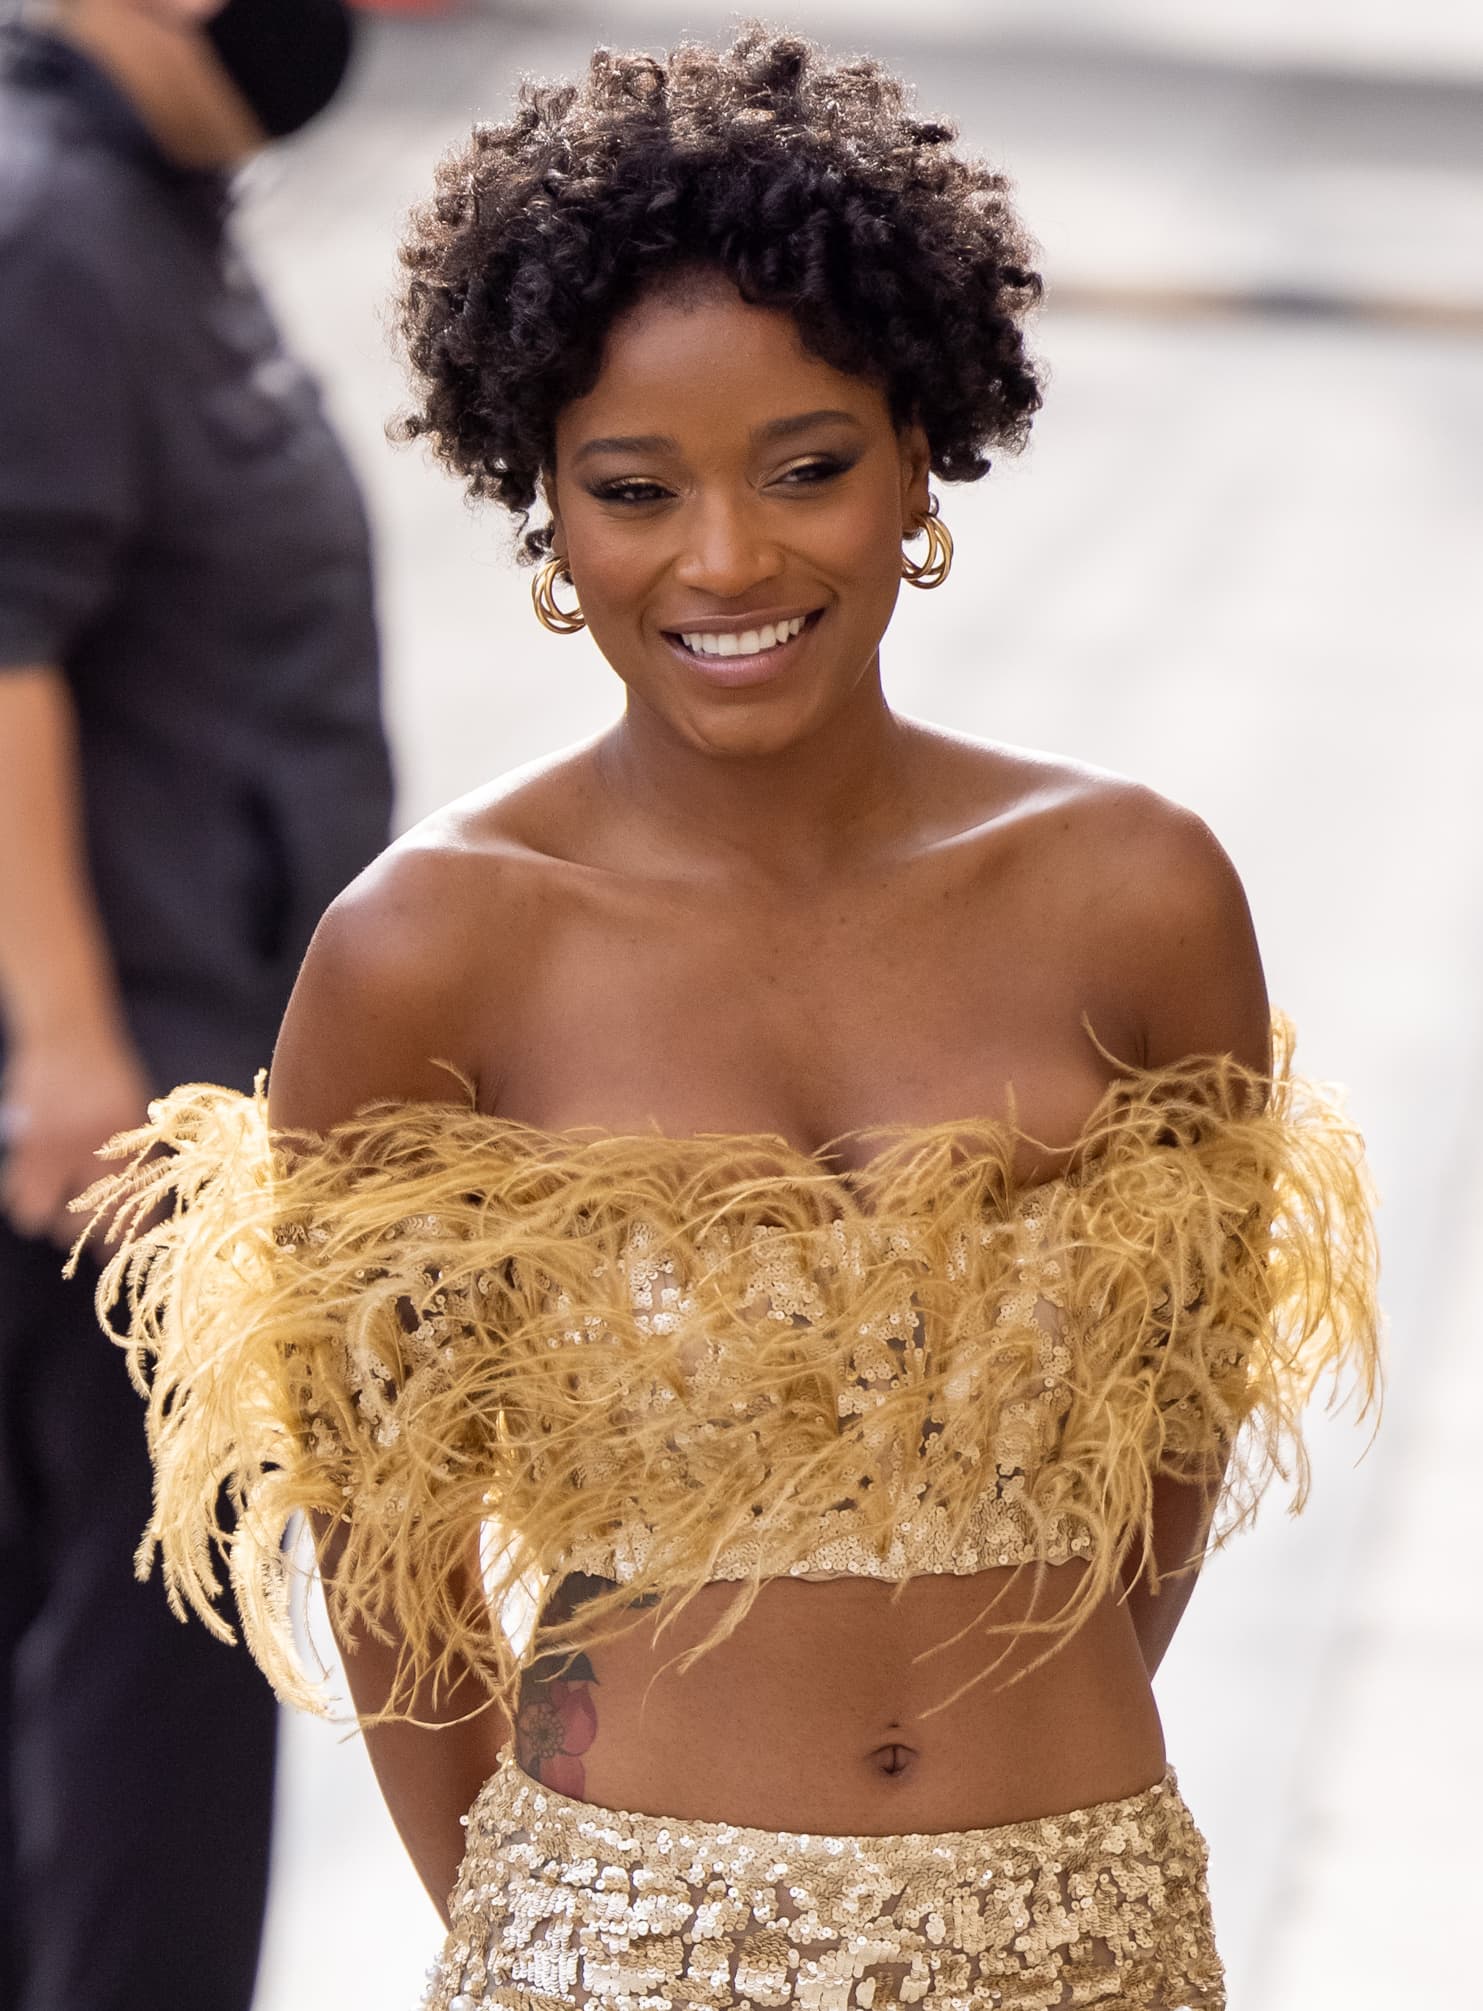 Keke Palmer wears her natural curls and glams up with bronze eyeshadow, false eyelashes and nude lip color